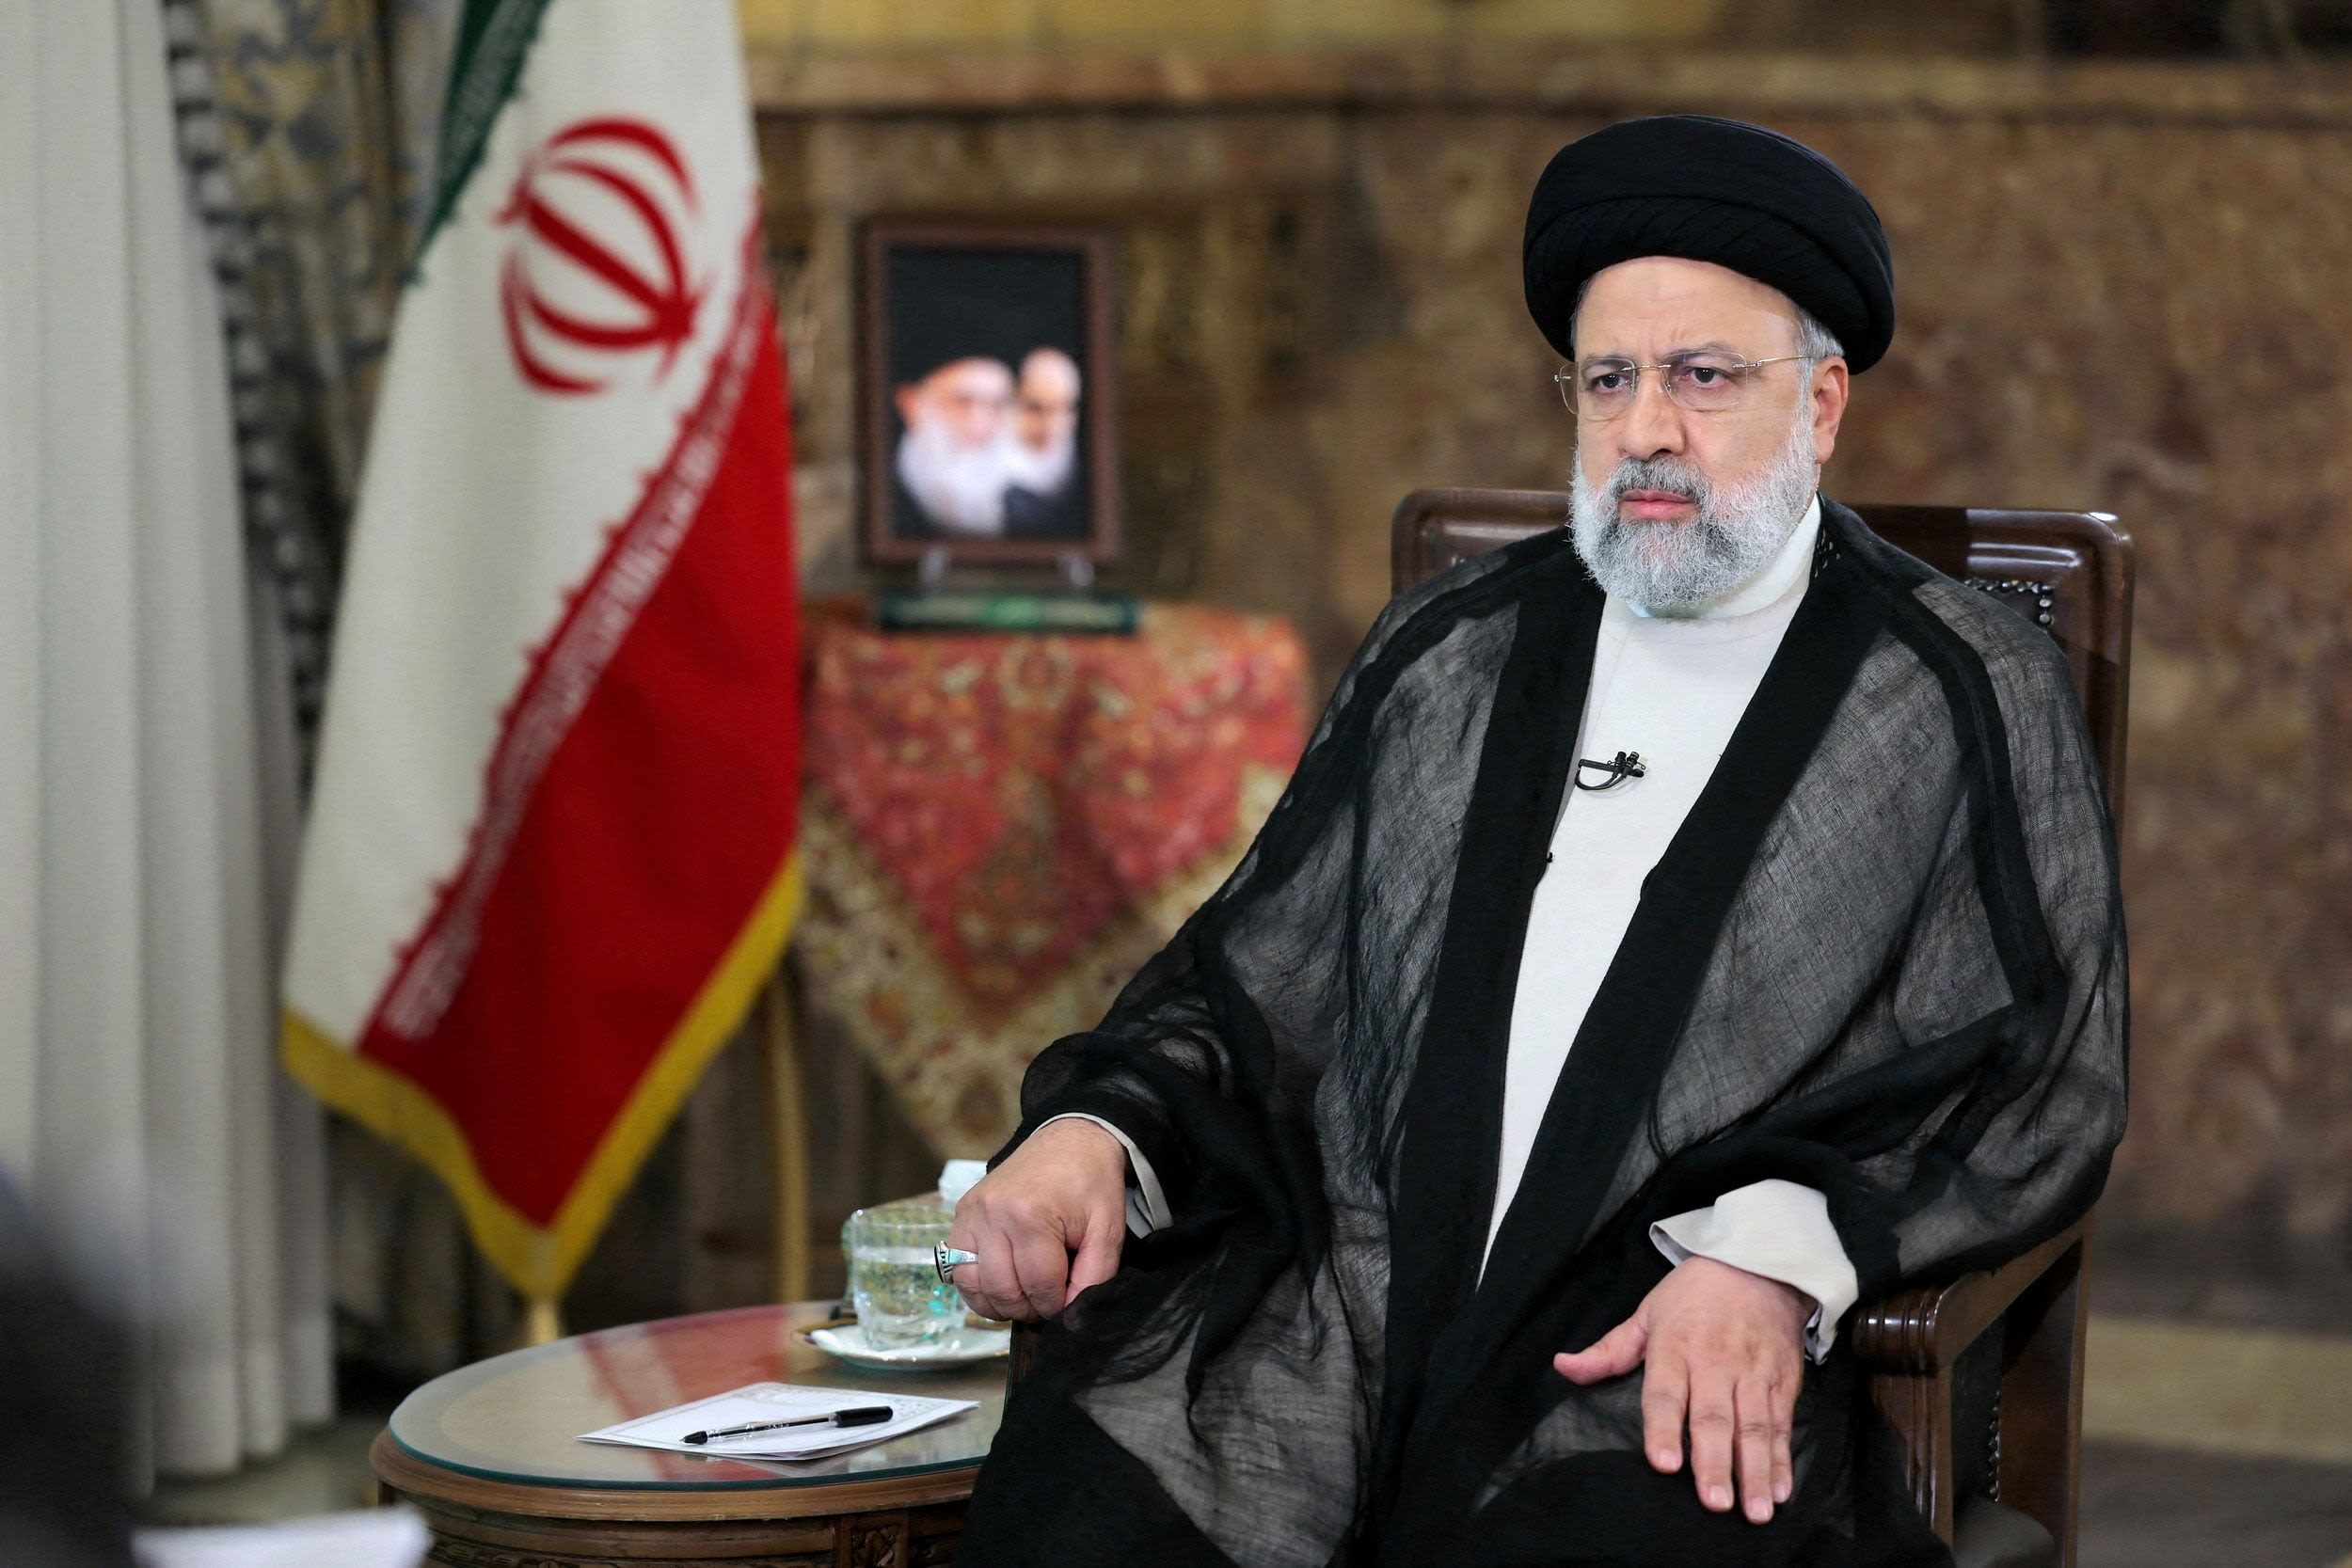 Helicopter carrying Iran's president has crashed, state media reports